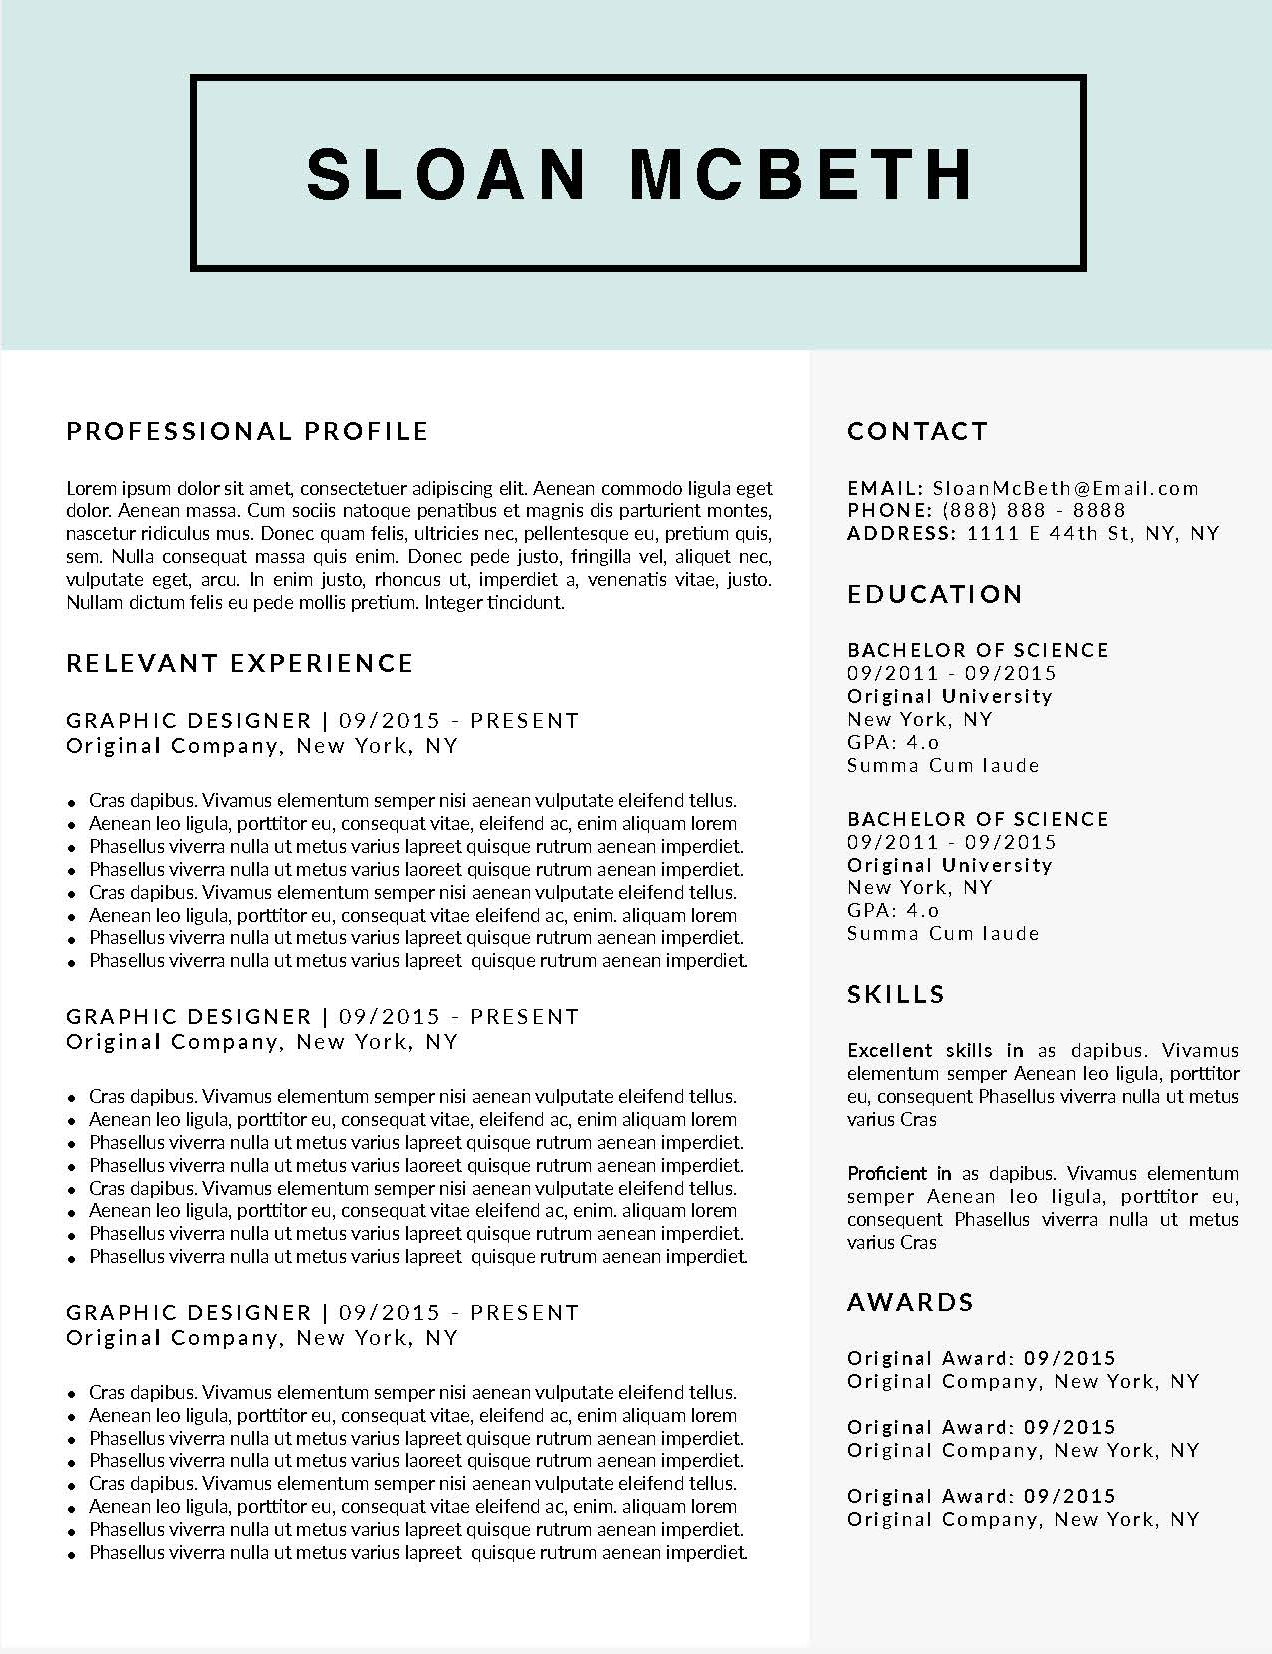 Sloan McBeth - Downloadable Resume Template and Cover Letter Template for Microsoft Word and Apple Pages